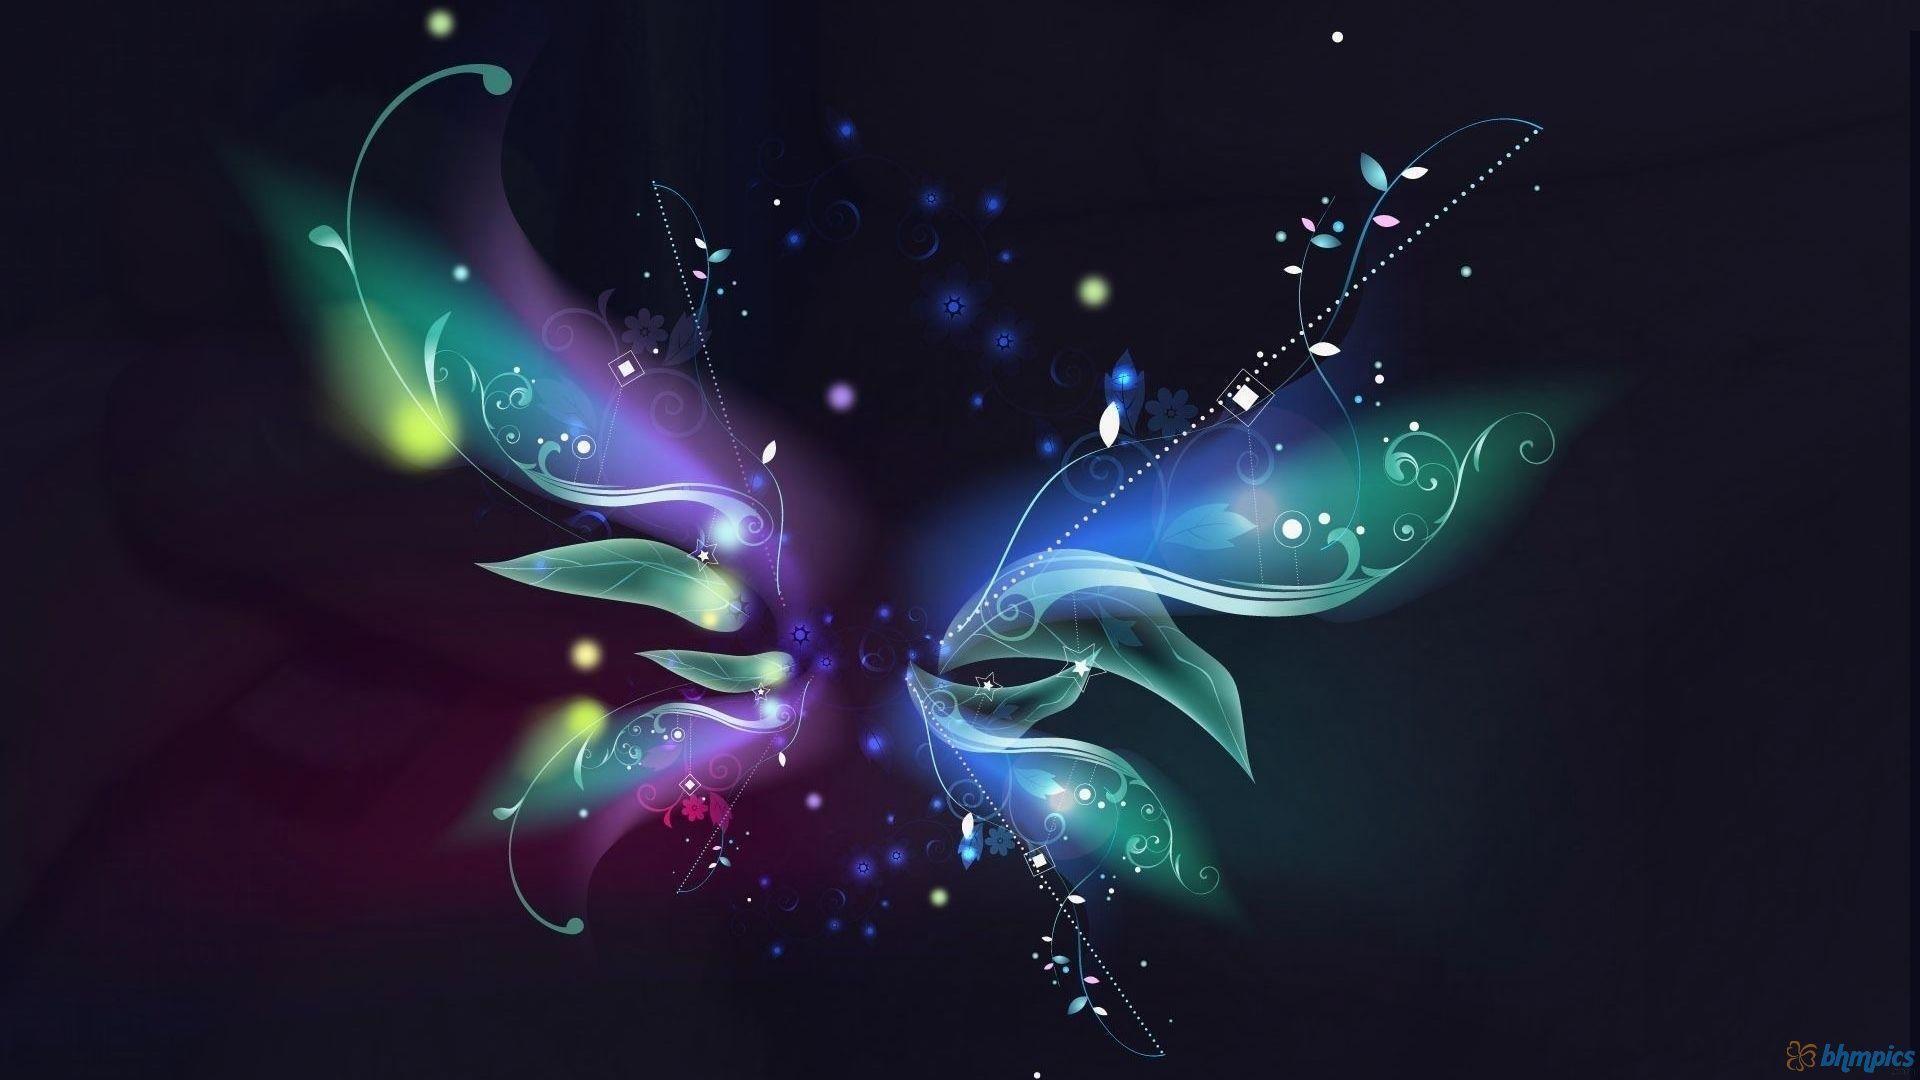 Butterfly Abstract Windows 8.1 Theme. Windows 8.1 Themes